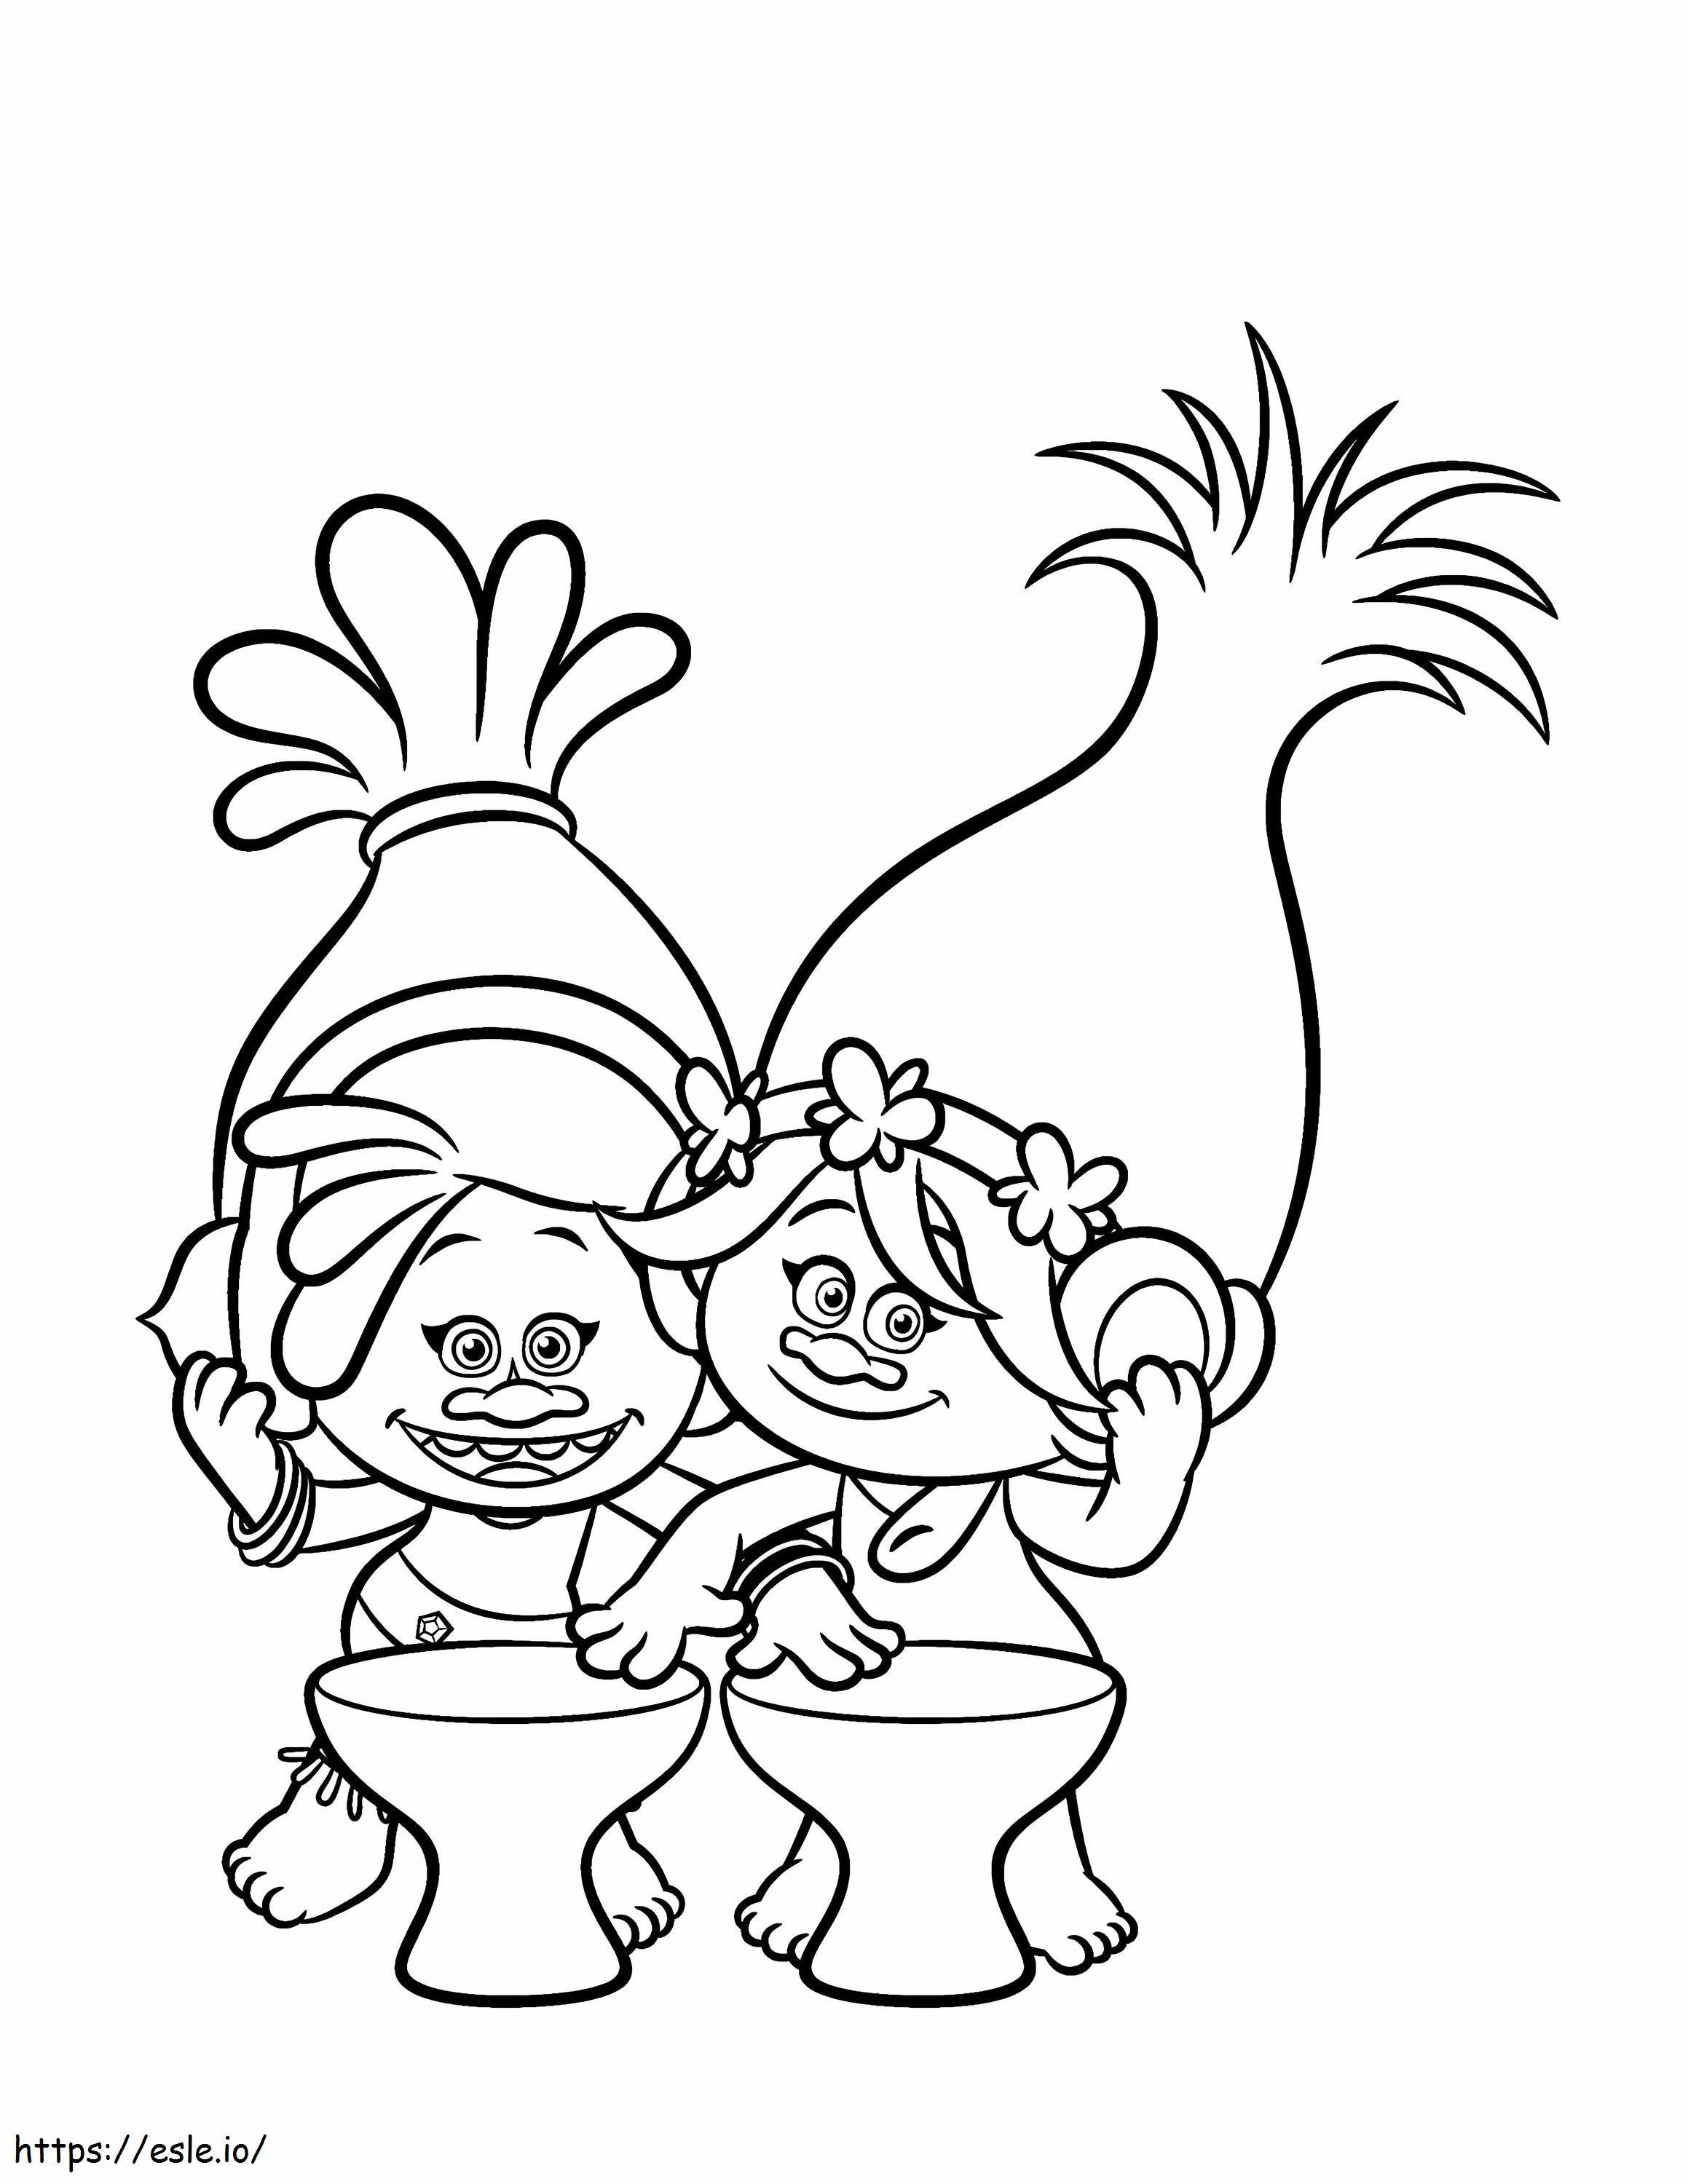 Poppy And Friend coloring page